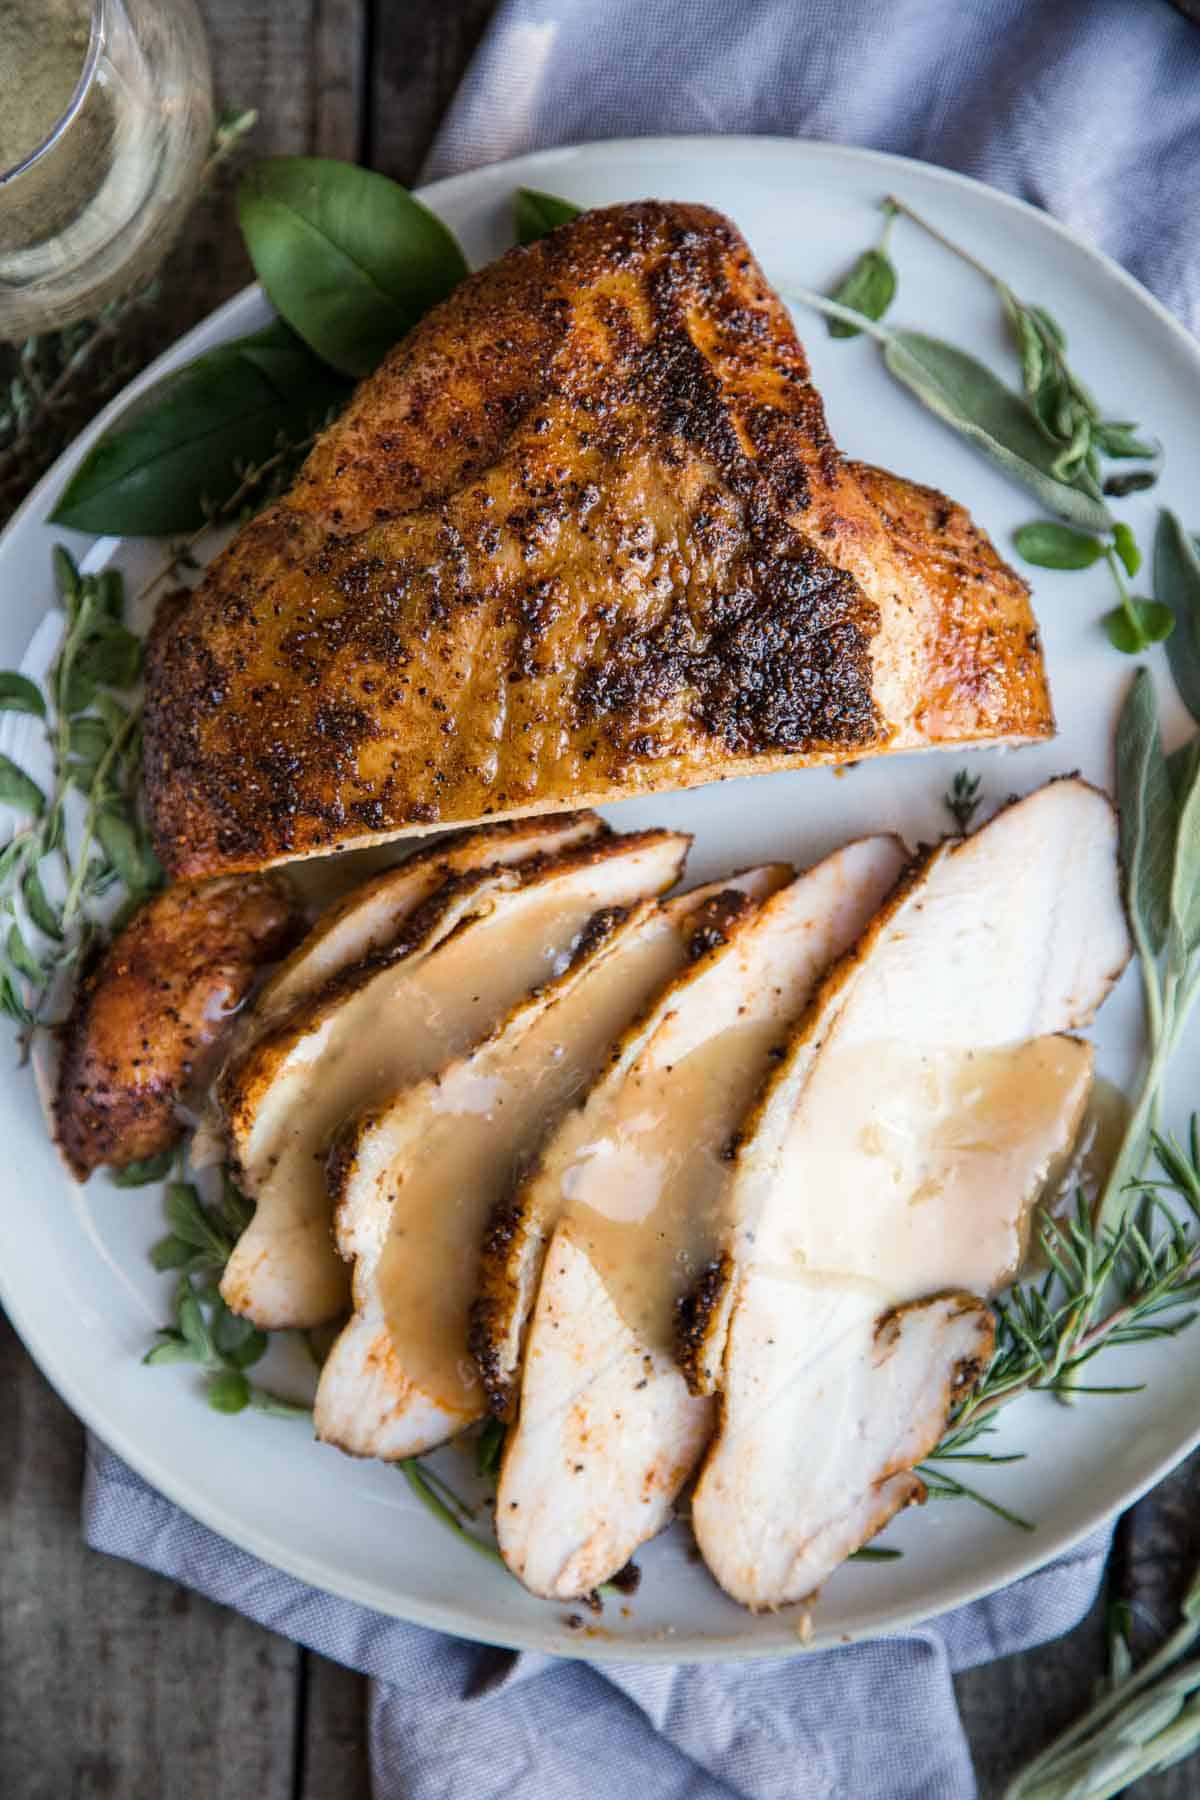 Smoked turkey breast with gravy over the top